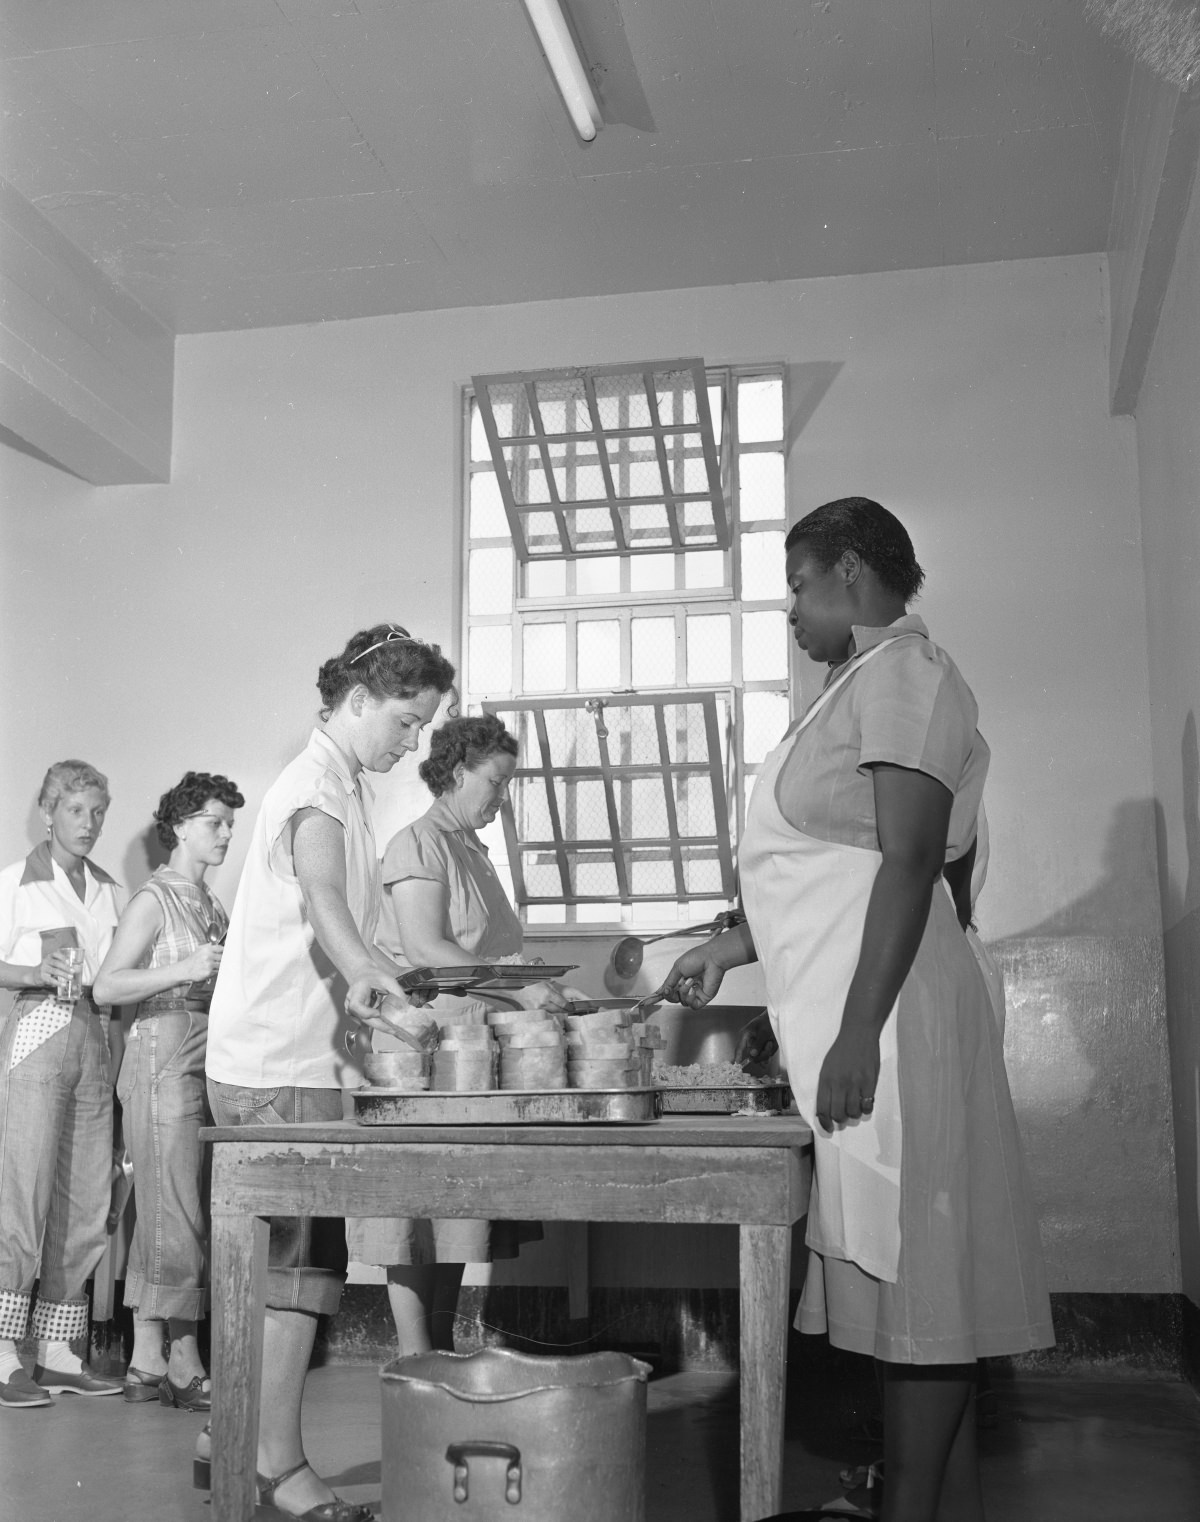 Inmates in the cafeteria at mealtime – September 8, 1954